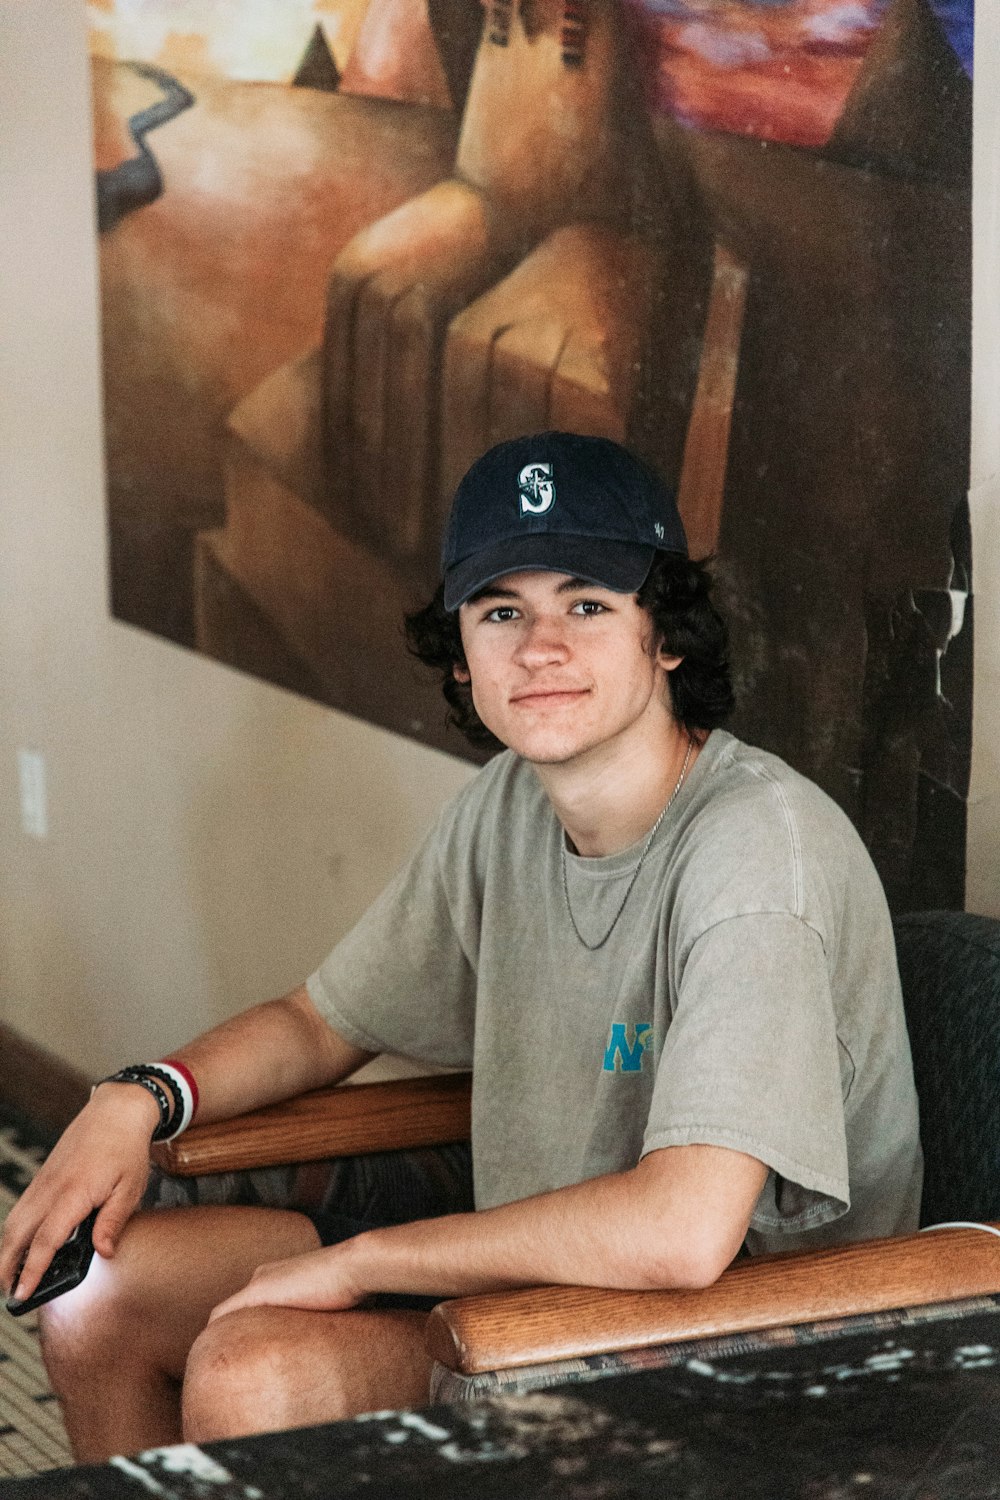 a boy sitting in a chair with a baseball cap on